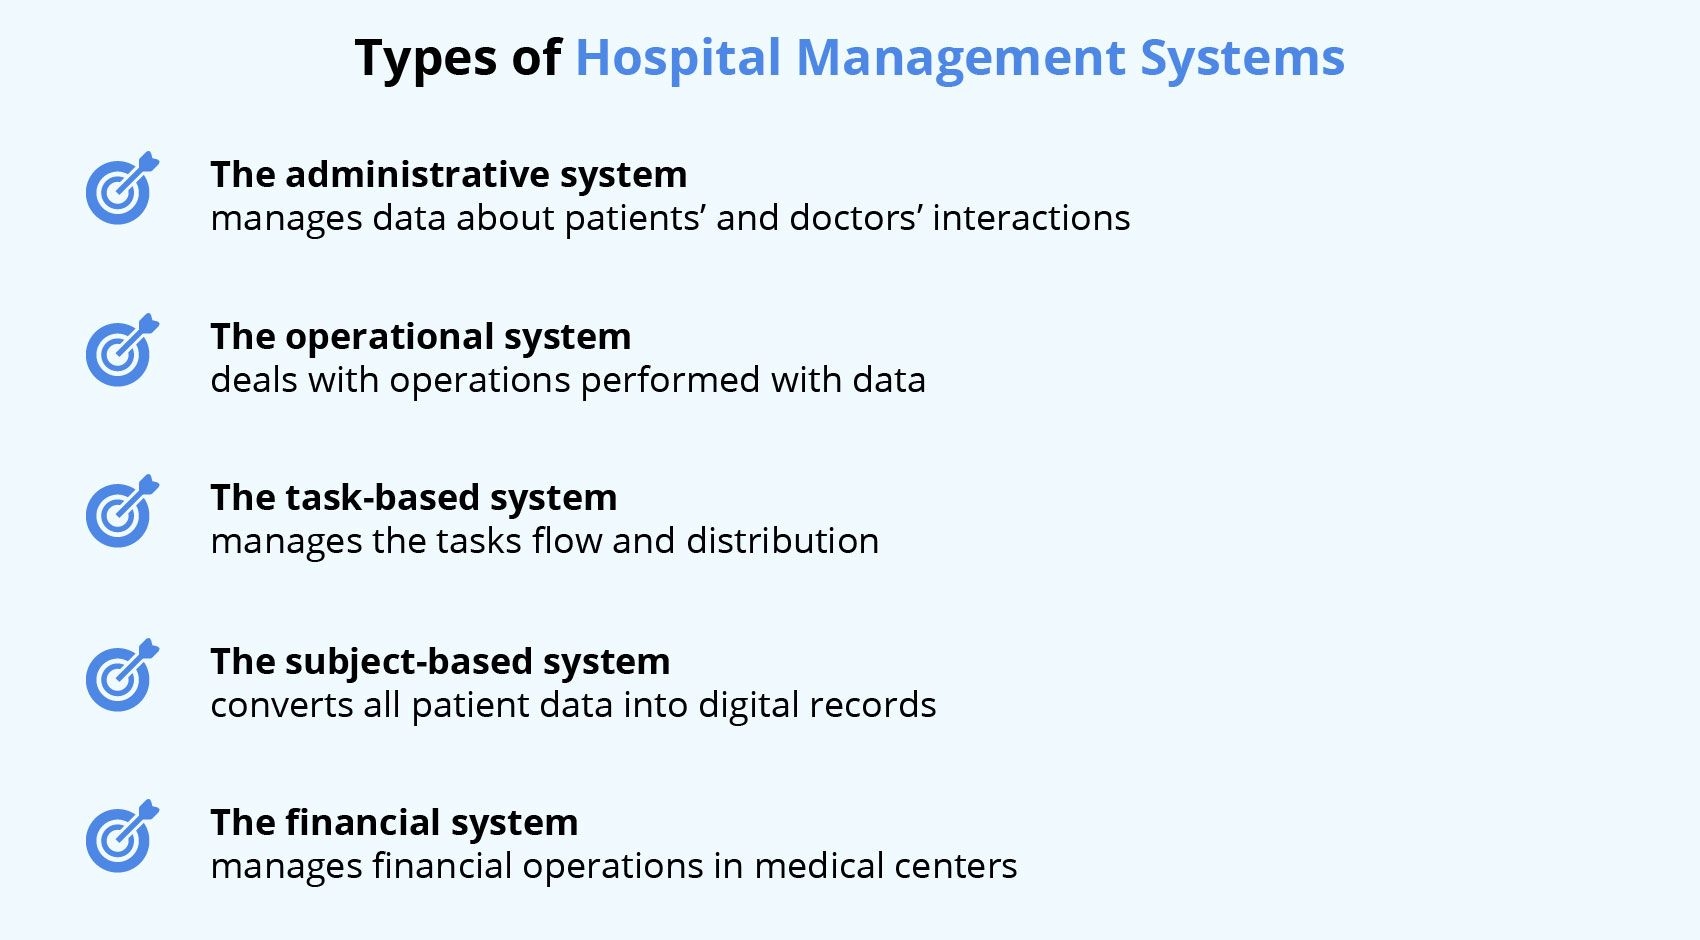 Types of Hospital Management Systems